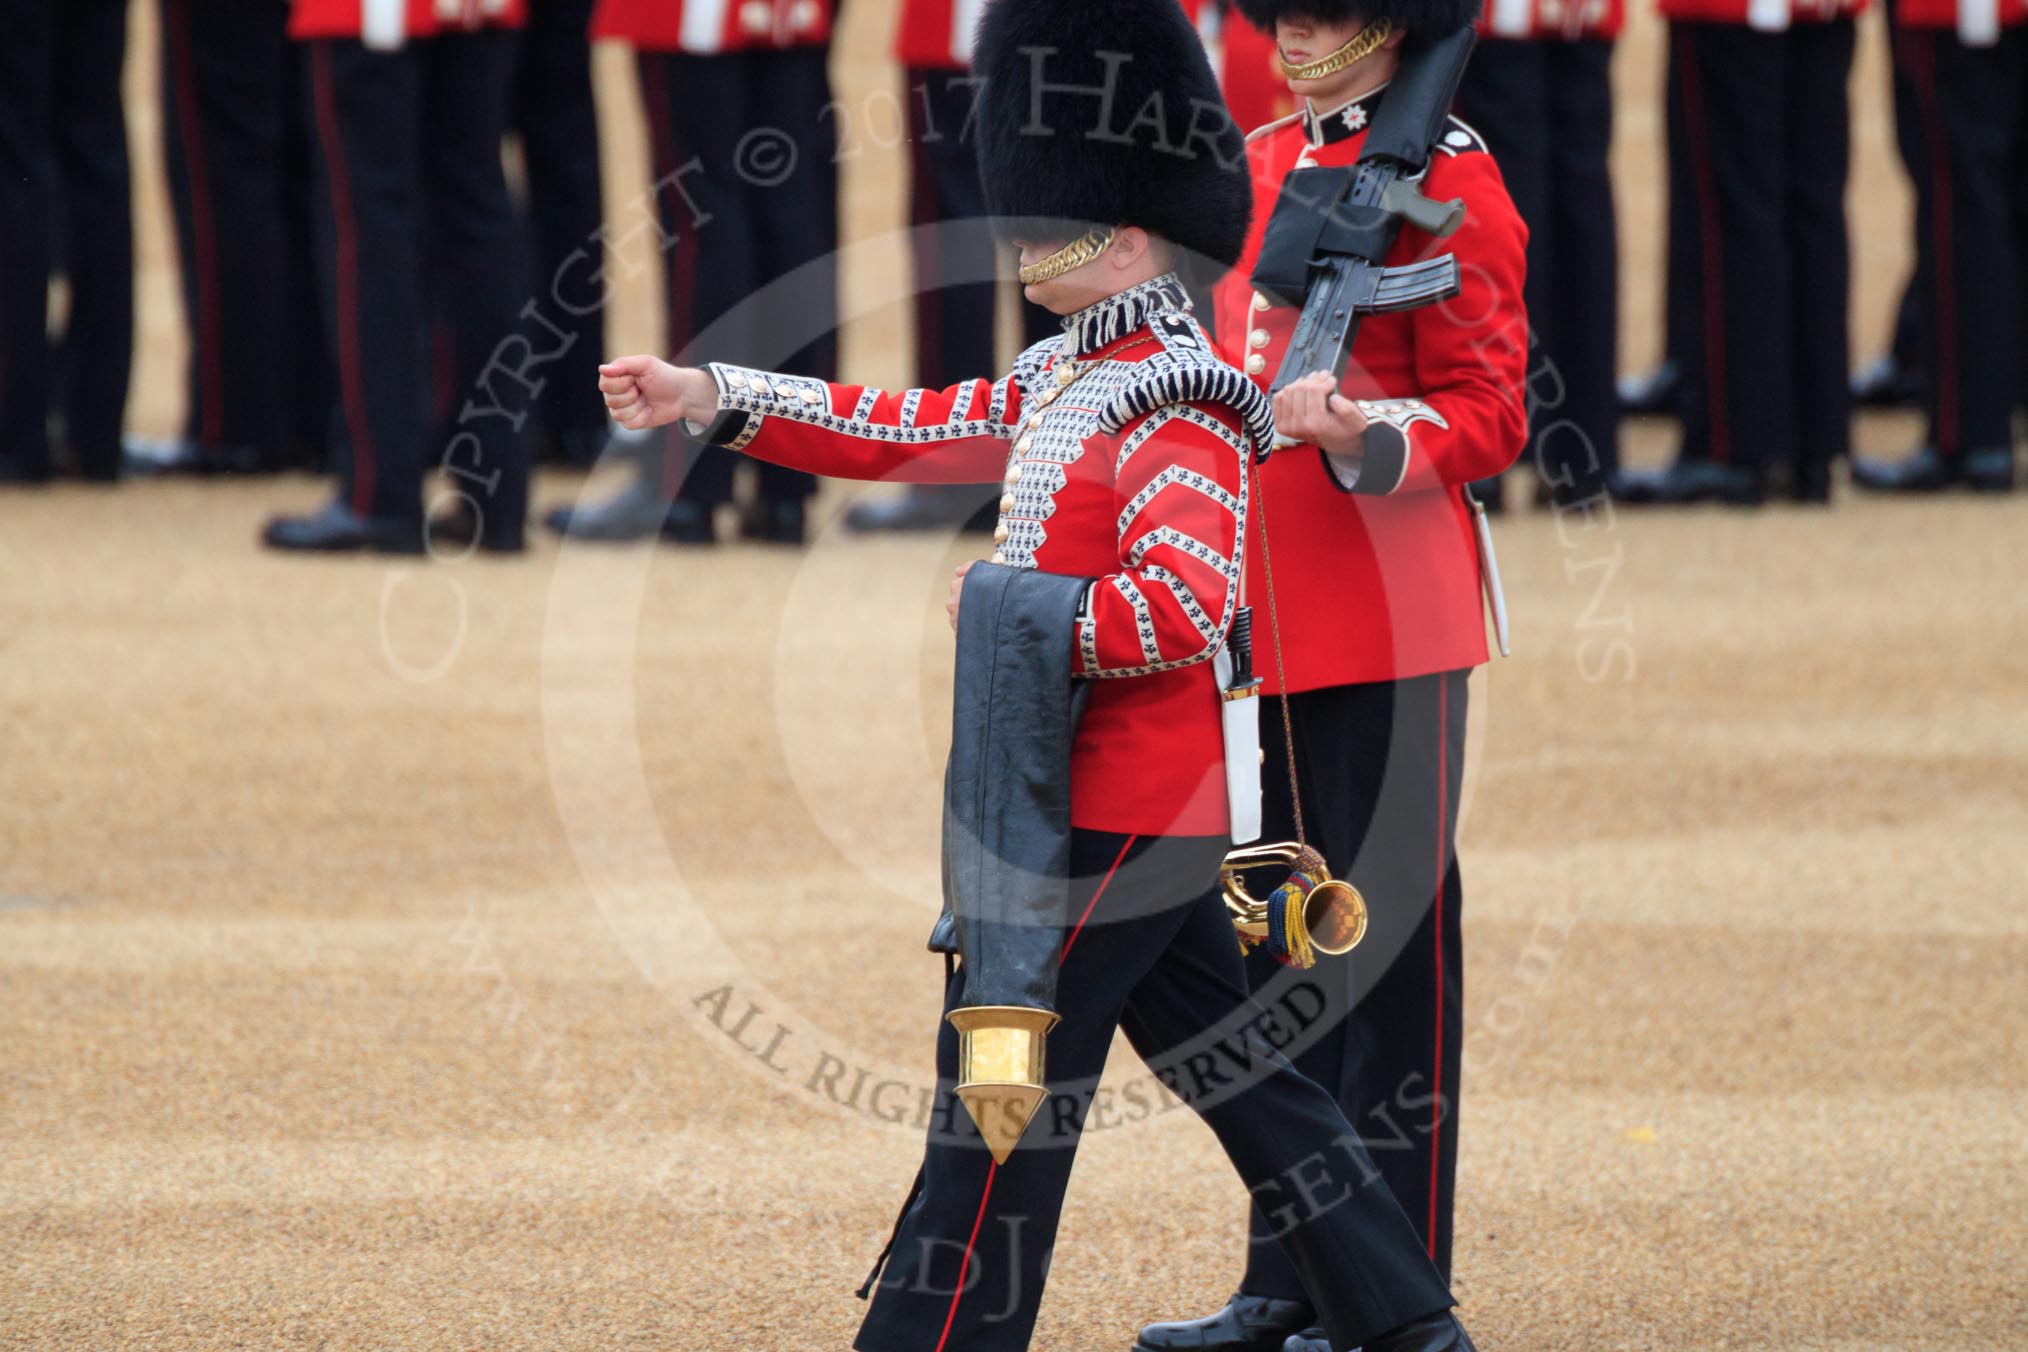 Duty Drummer Sam Orchard marching off with the Colour case, behind him Colour Sentry Guardsman Jonathon Hughes (26), during The Colonel's Review 2018 (final rehearsal for Trooping the Colour, The Queen's Birthday Parade)  at Horse Guards Parade, Westminster, London, 2 June 2018, 10:34.